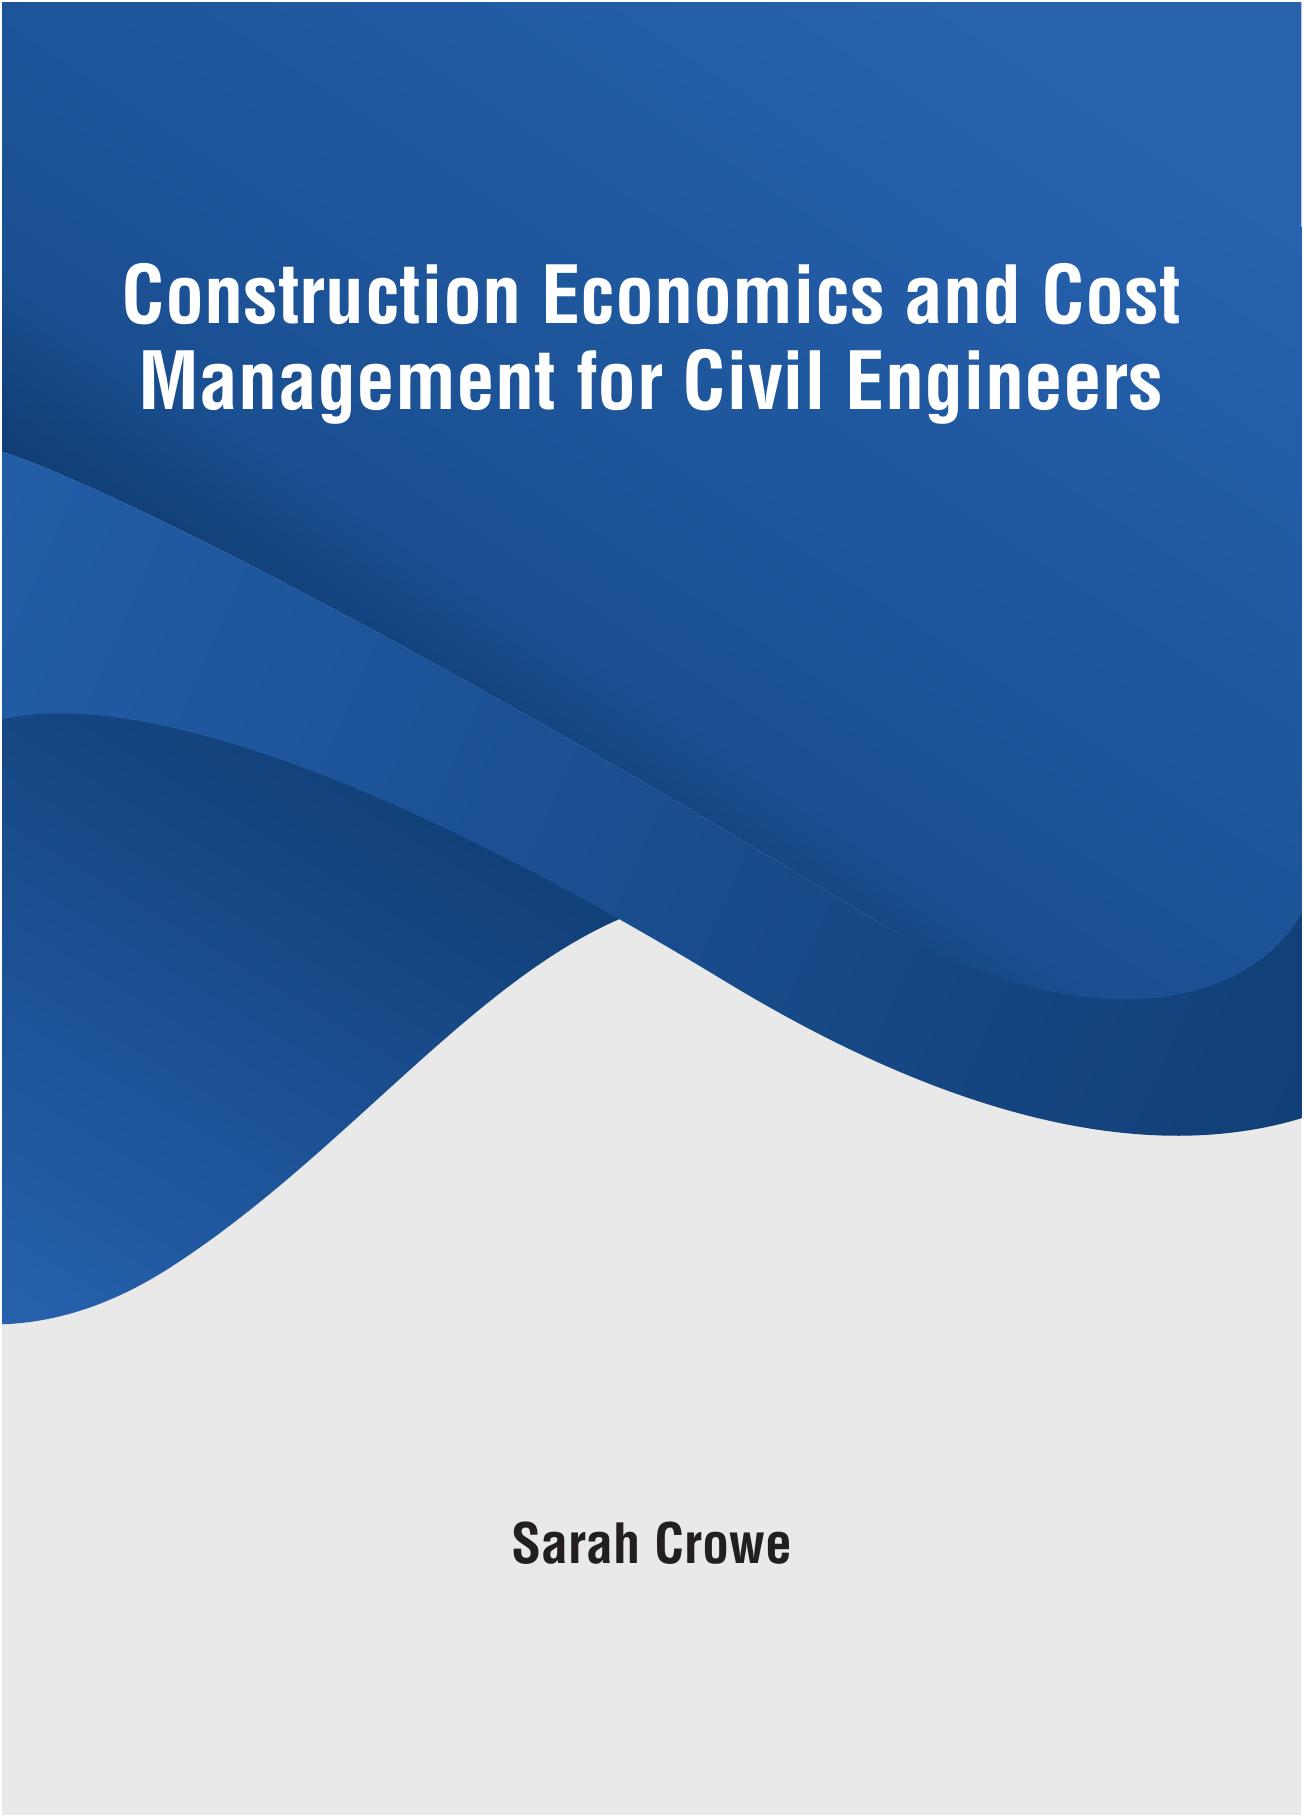 Construction Economics and Cost Management for Civil Engineers 2015